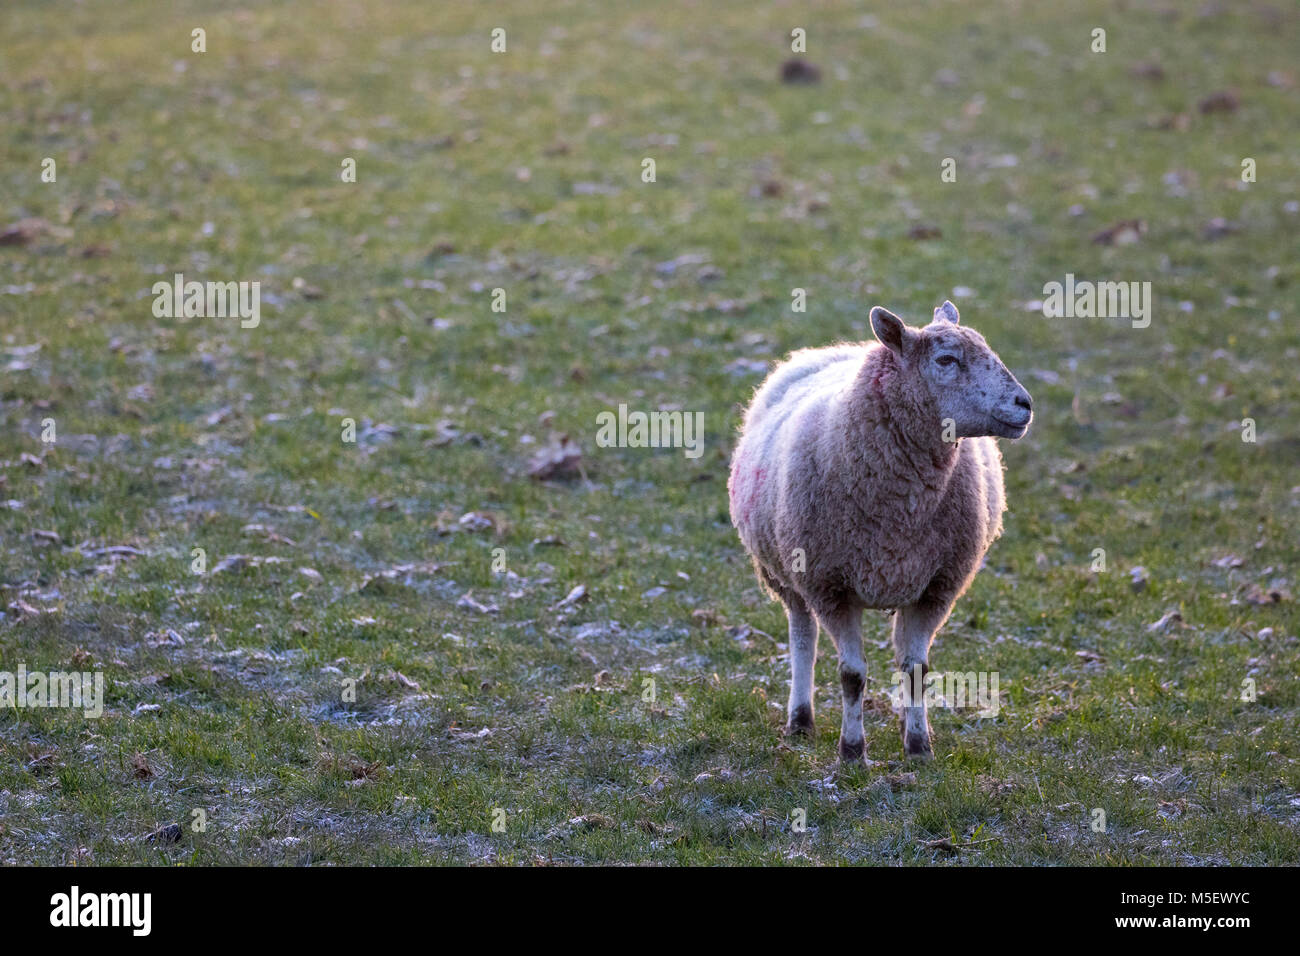 Flintshire, Wales, UK 23rd February 2018, UK Weather:  Temperatures are already beginning to fall as an arctic air mass heads towards the UK named beast from the east bringing with it very cold temperatures and snow in the coming days. Many today will begin to feel the as temperatures dropped well below freezing last night. A sheep braving the freezing weather in a frozen field in the village of Lixwm, Flintshire © DGDImages/Alamy Live News Stock Photo